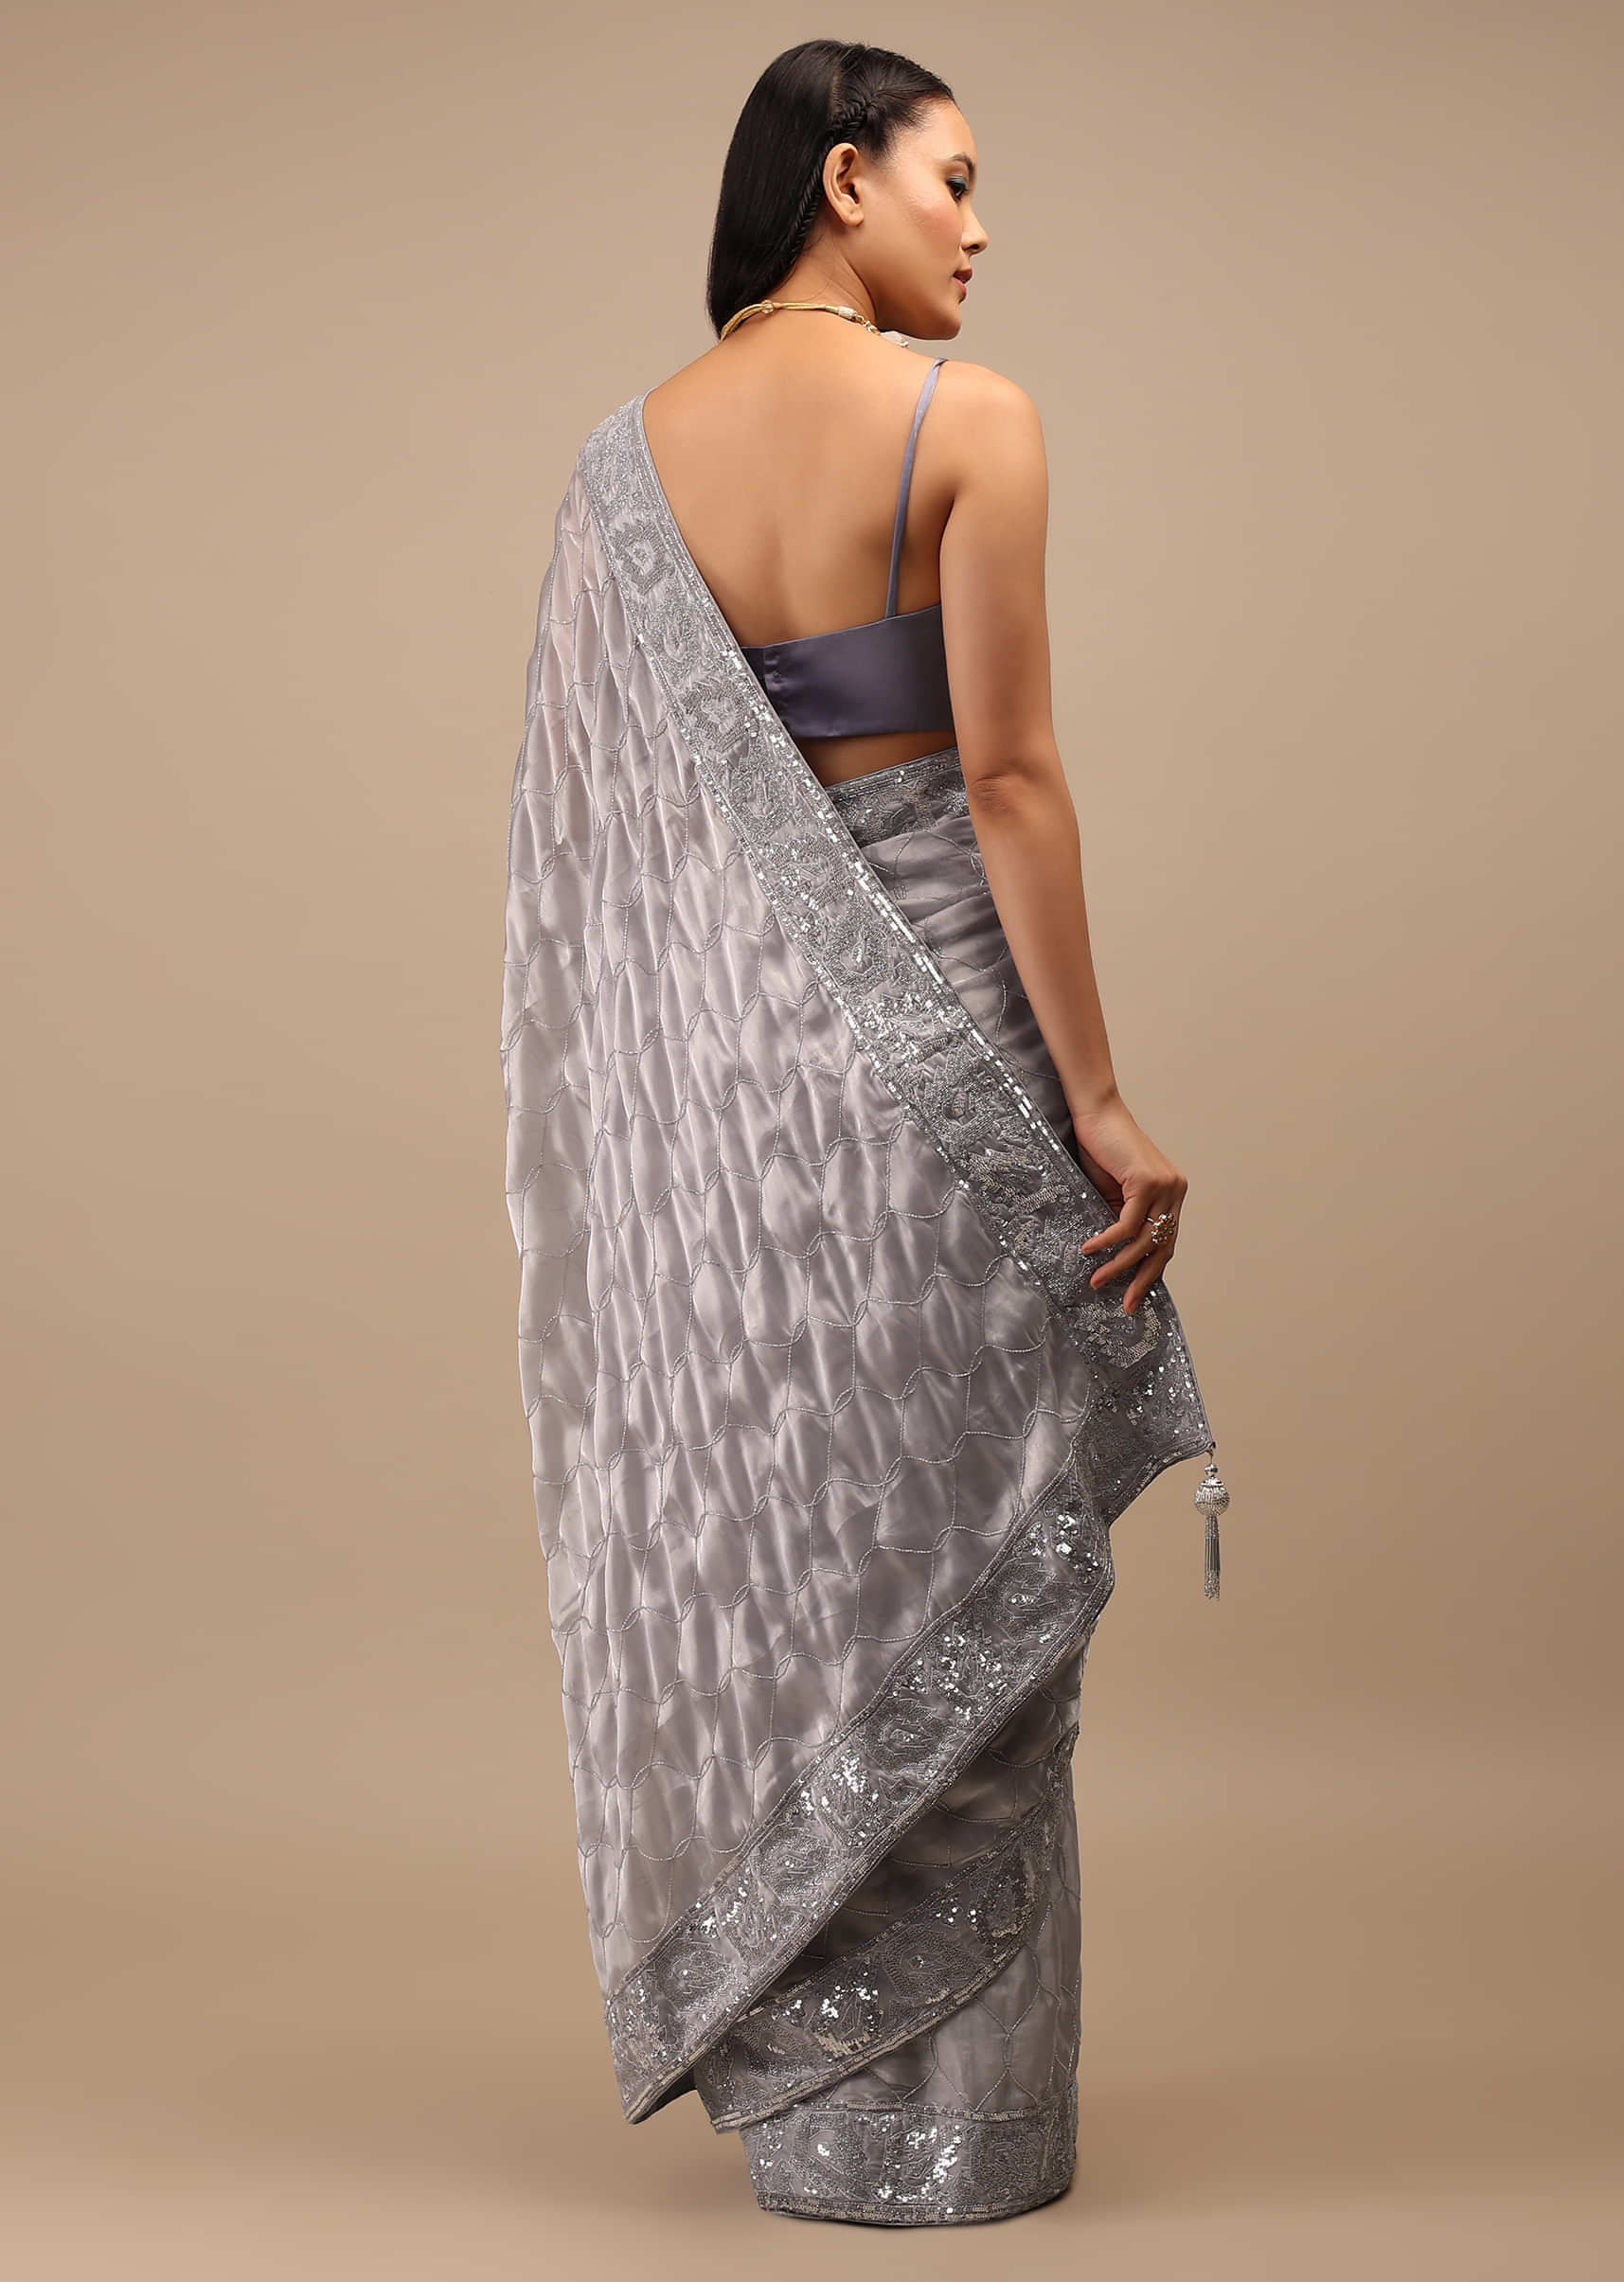 Lilac Grey Tissue Saree In Cut Dana Embroidery In A Moroccan Jaal, The Border Has Resham Work And Moti Tassel Embroidery